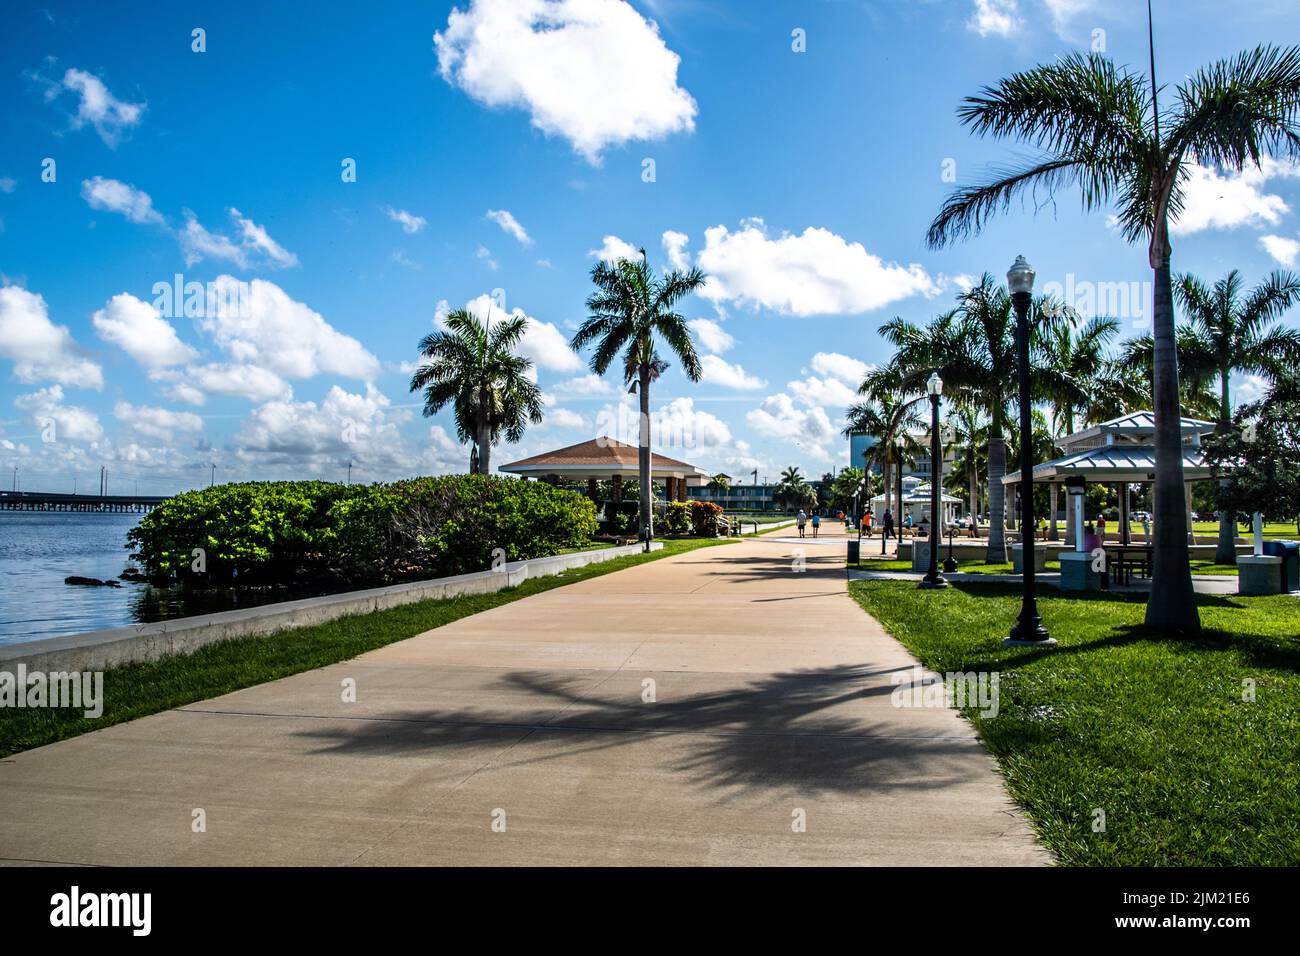 Harborwalk waterfront multi-use path in Punta Gorda, Florida, Charlotte County, Barron Collier Bridge seen in the distance. Parks and outdoor activity Stock Photo